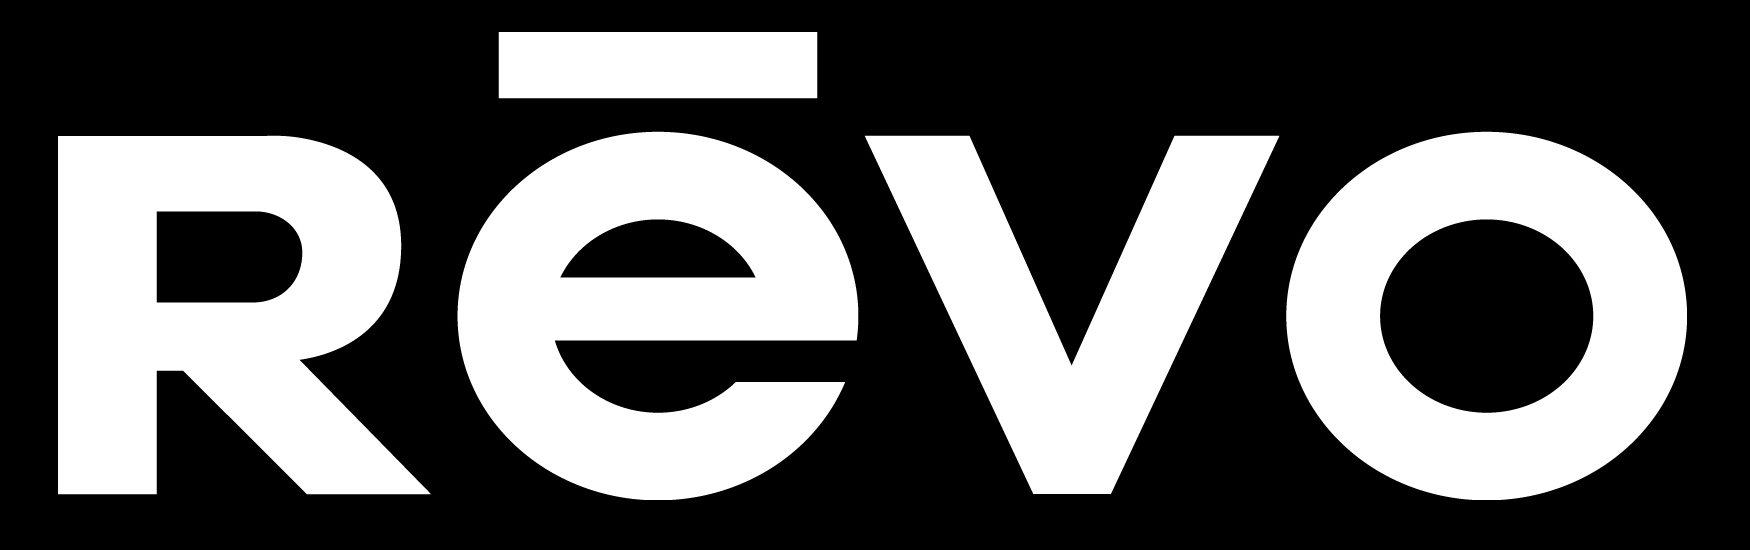 Revo Coupons and Deals